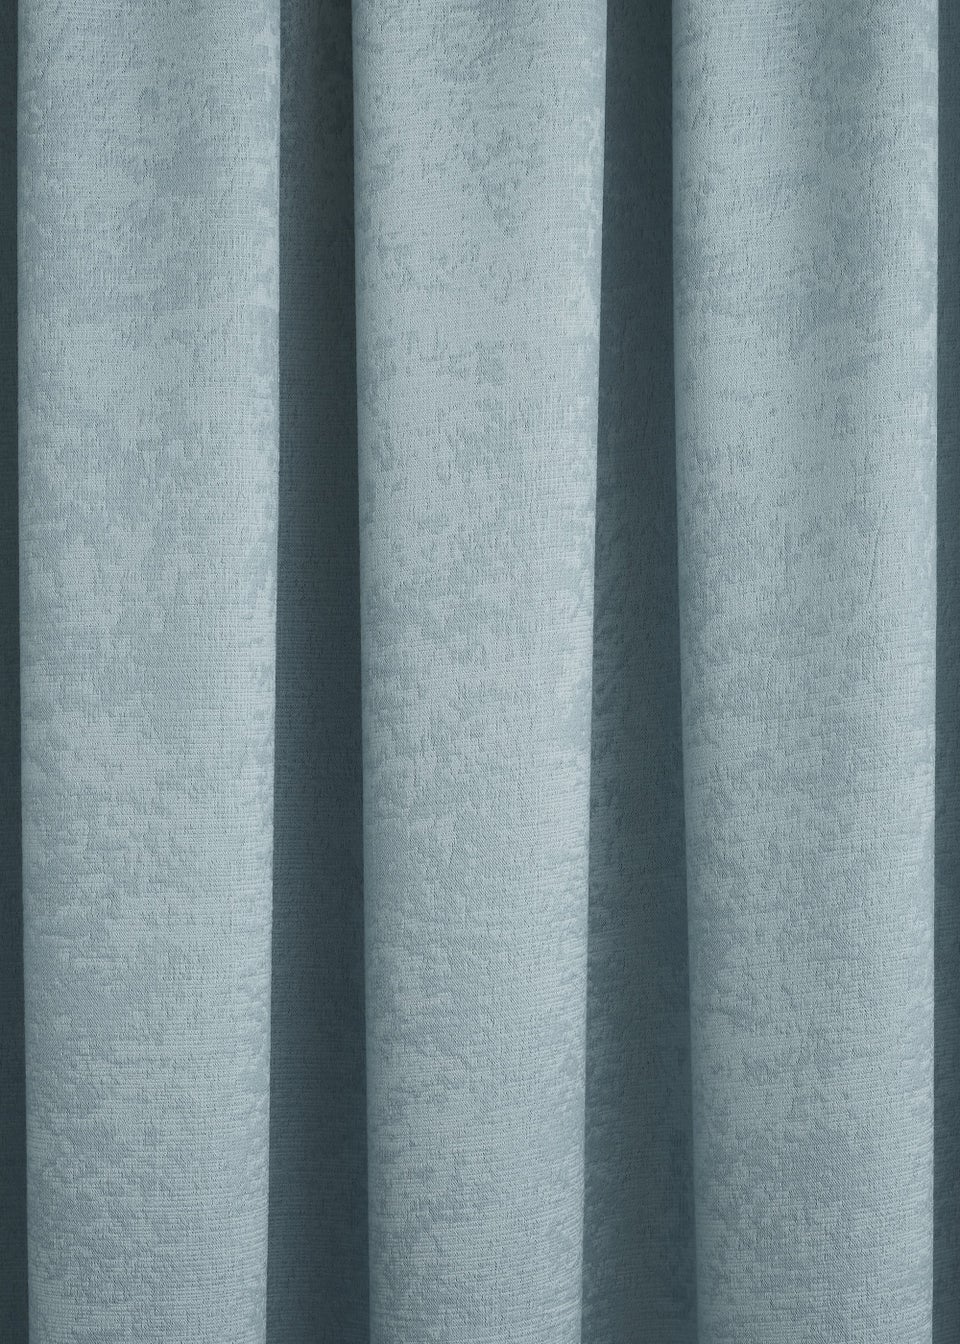 Fusion Galaxy Dimout Blue Pencil Pleat Curtains